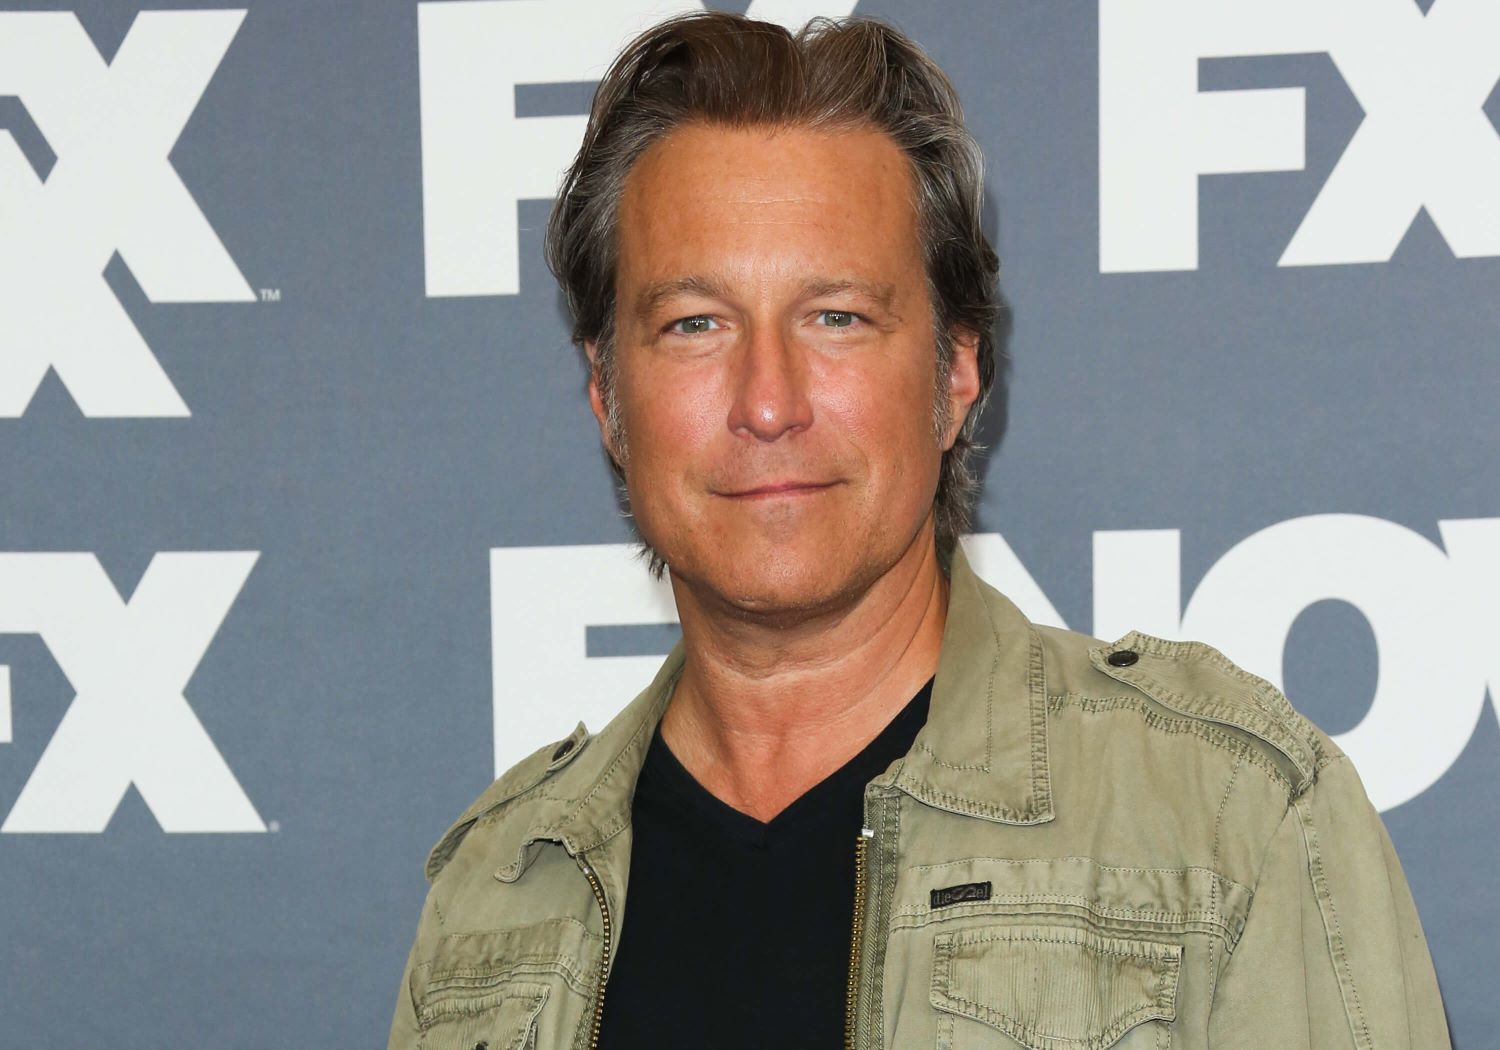 John Corbett, who stars as Robert in 'How I Met Your Father' Season 2, wears an olive green jacket over a black shirt.